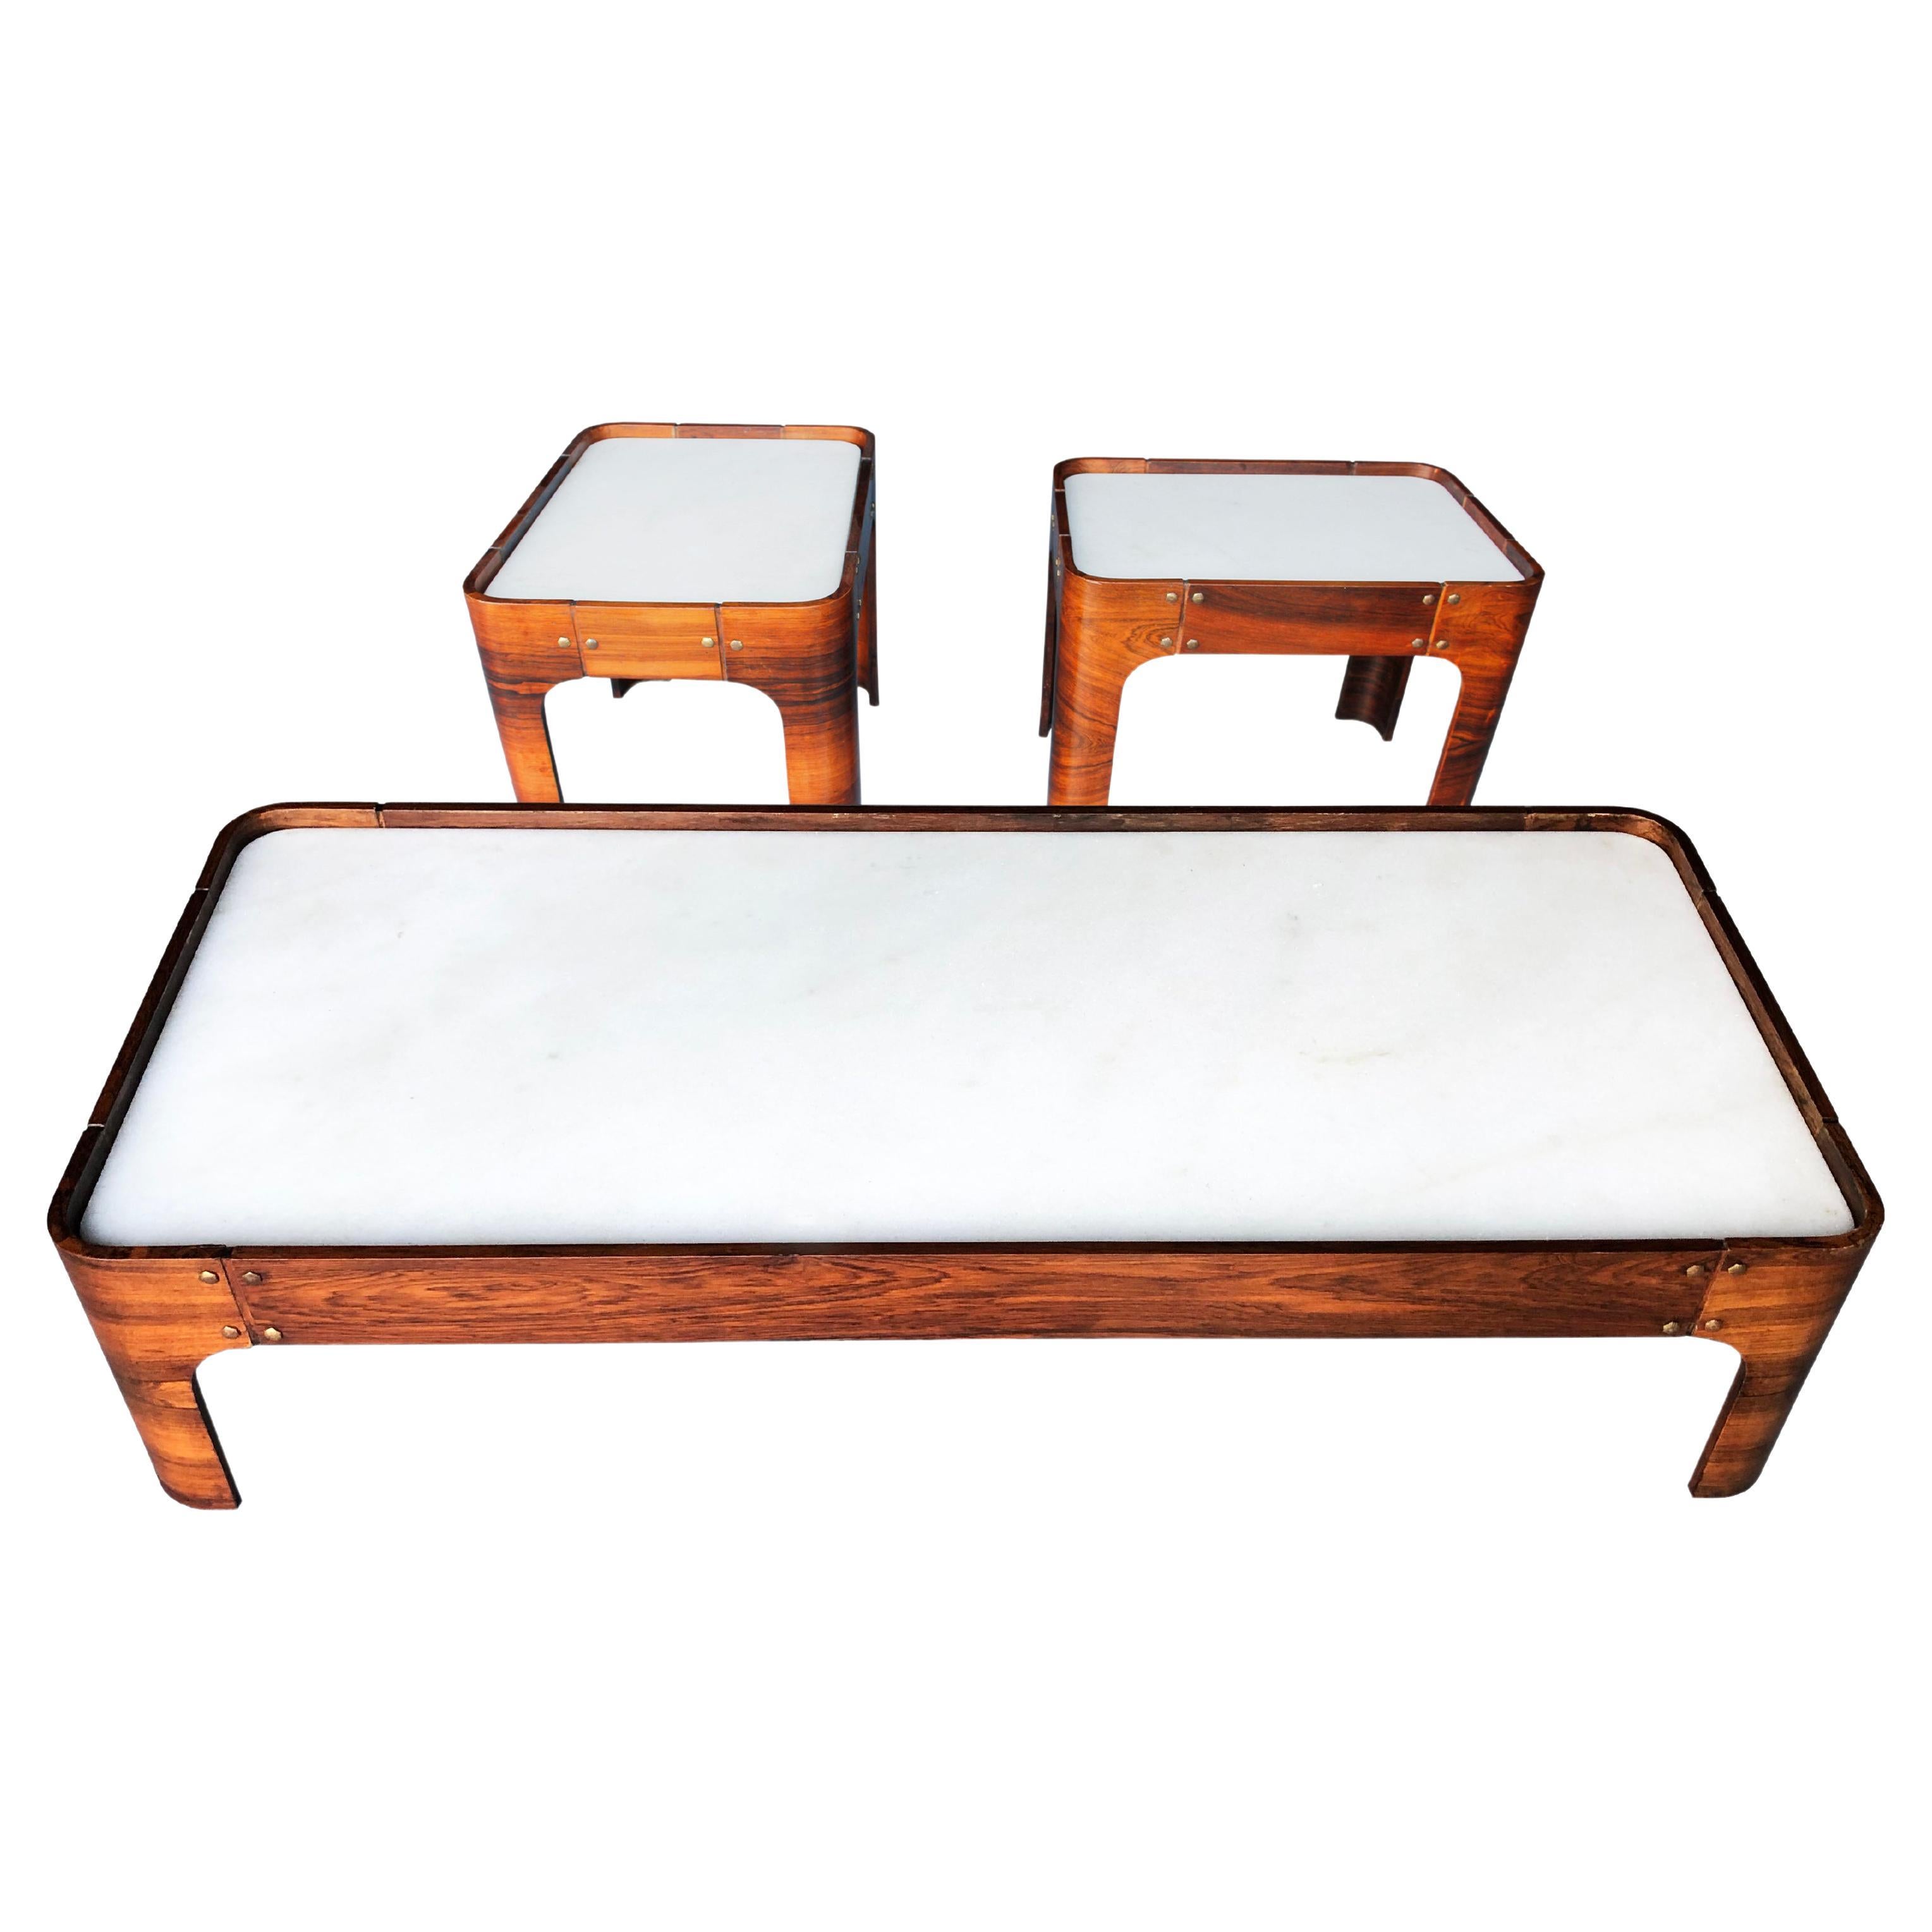 Set of Novo Rumo wood & Marble Coffee table & Side Tables. Brazil, 1960s